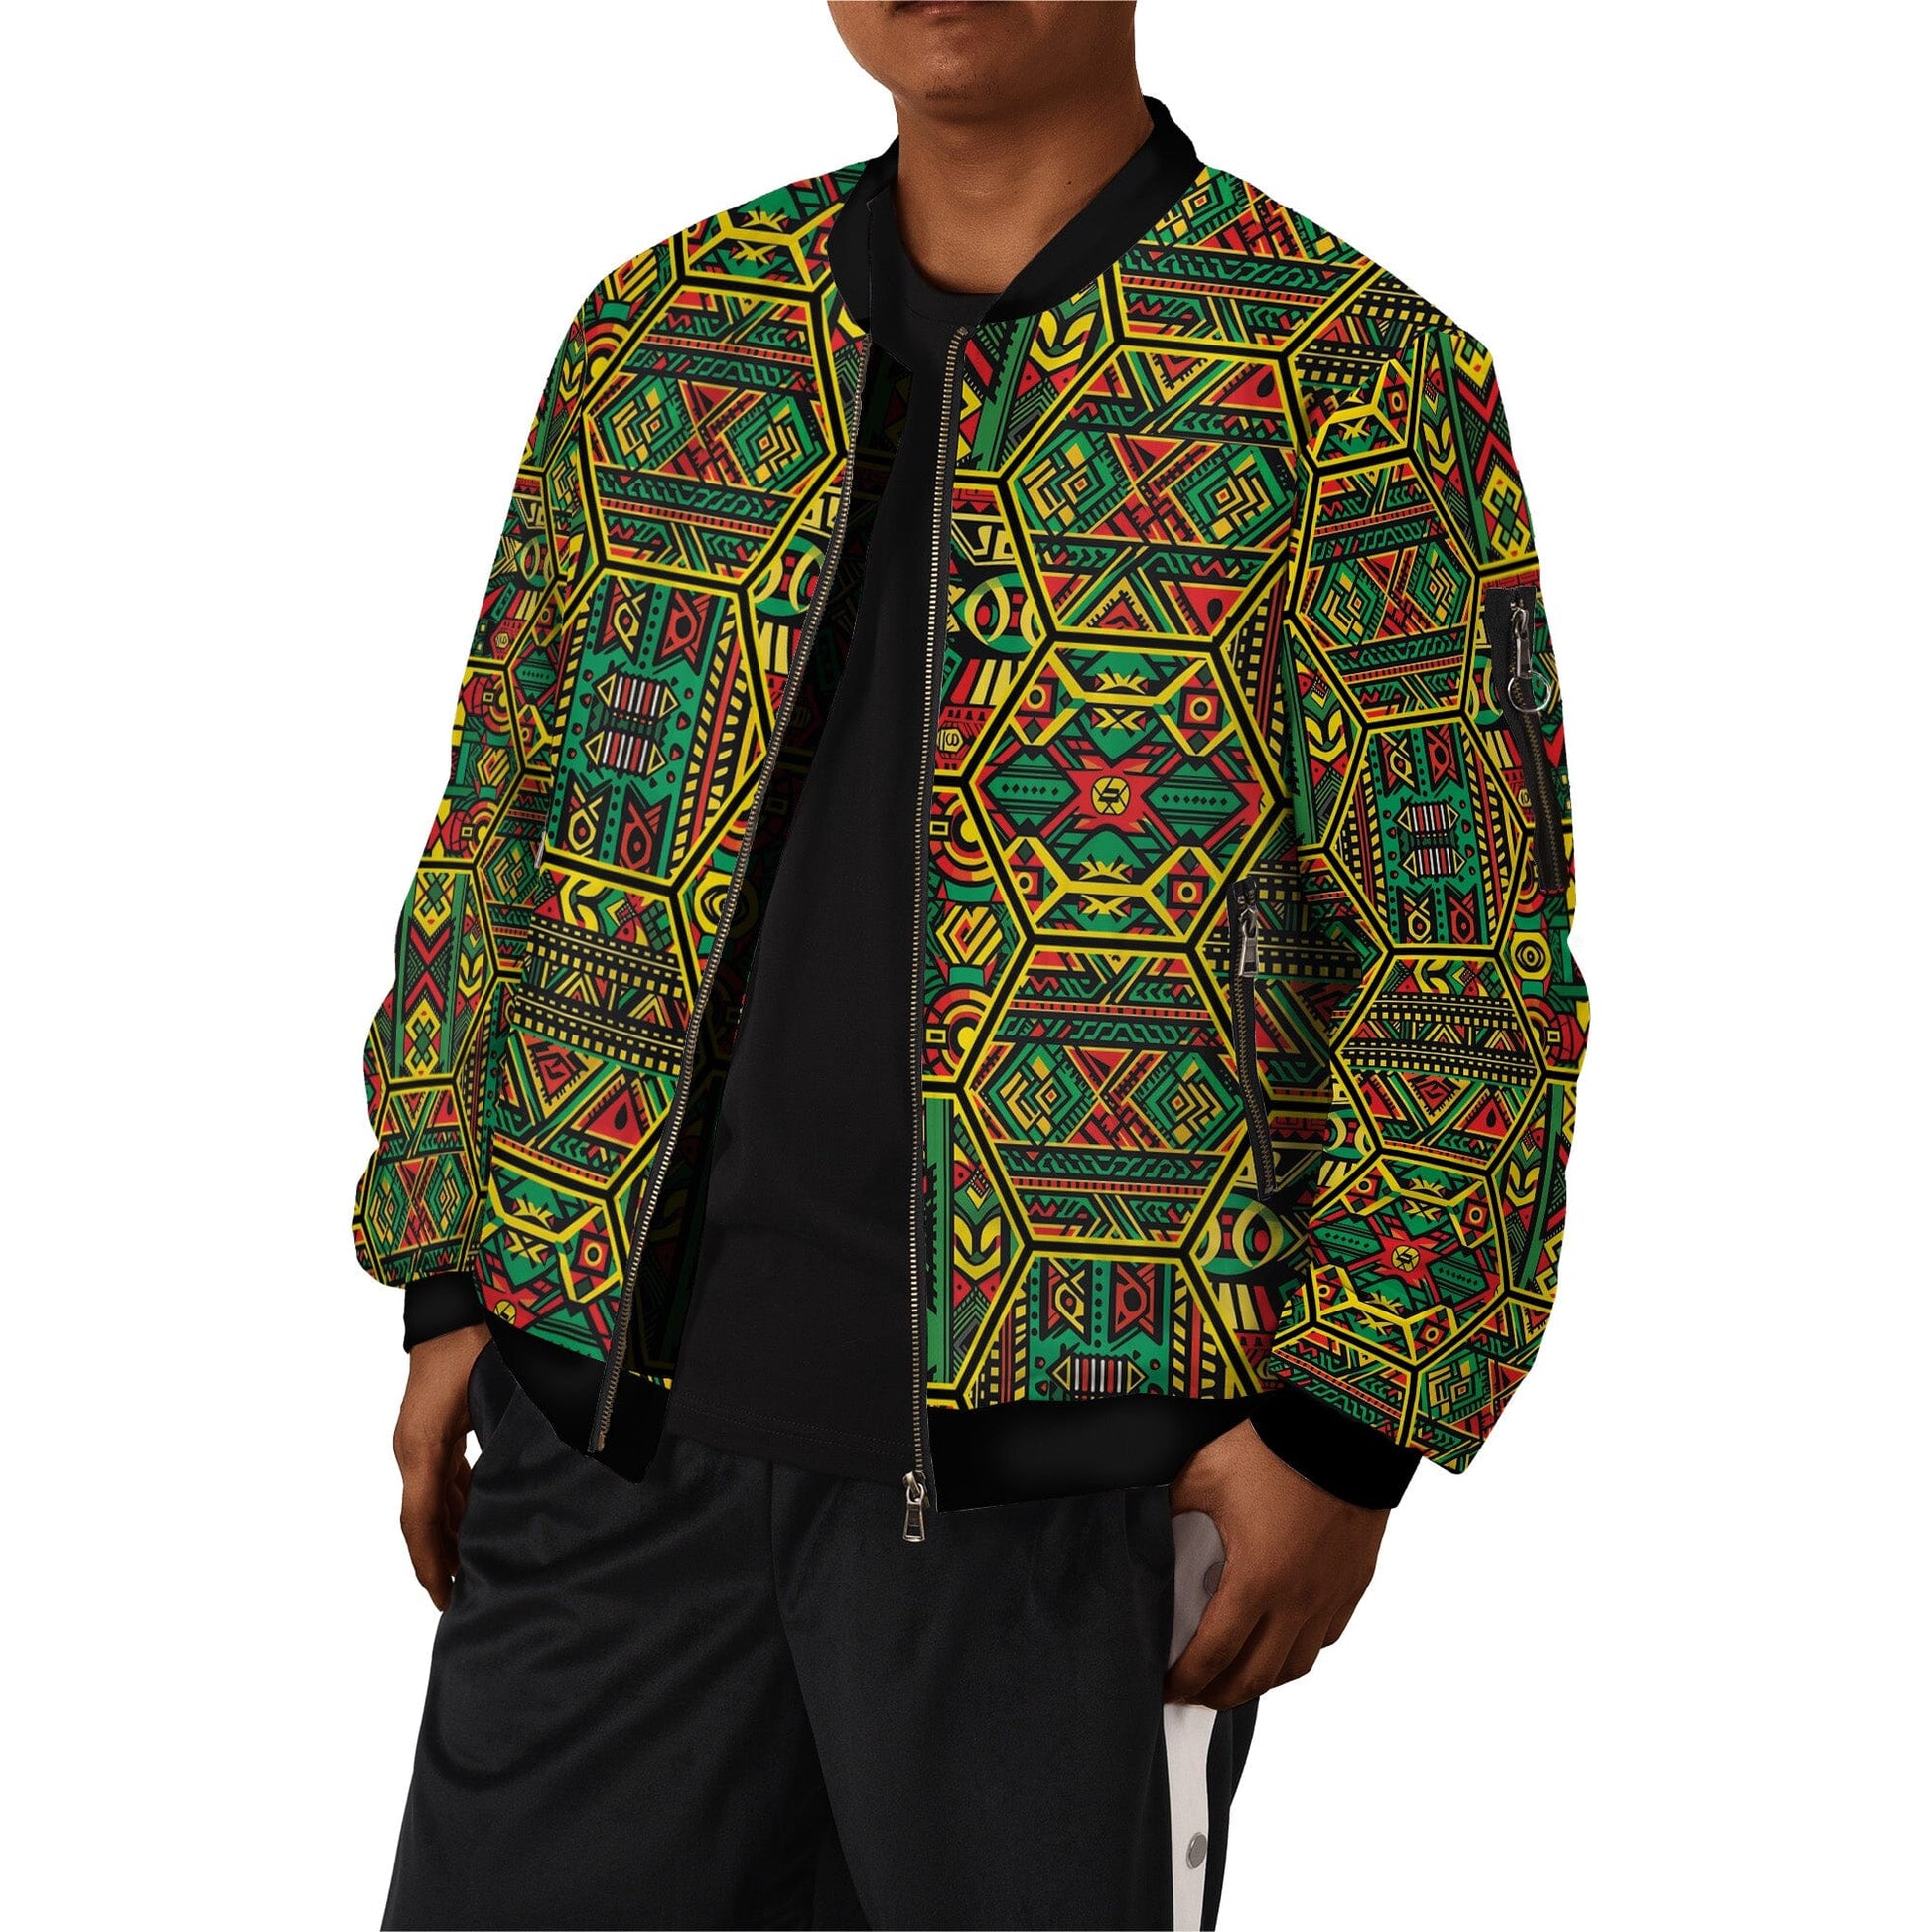 Hexagon African Patterns in Pan-African Colors Bomber Jacket Bomber Jacket Tianci 